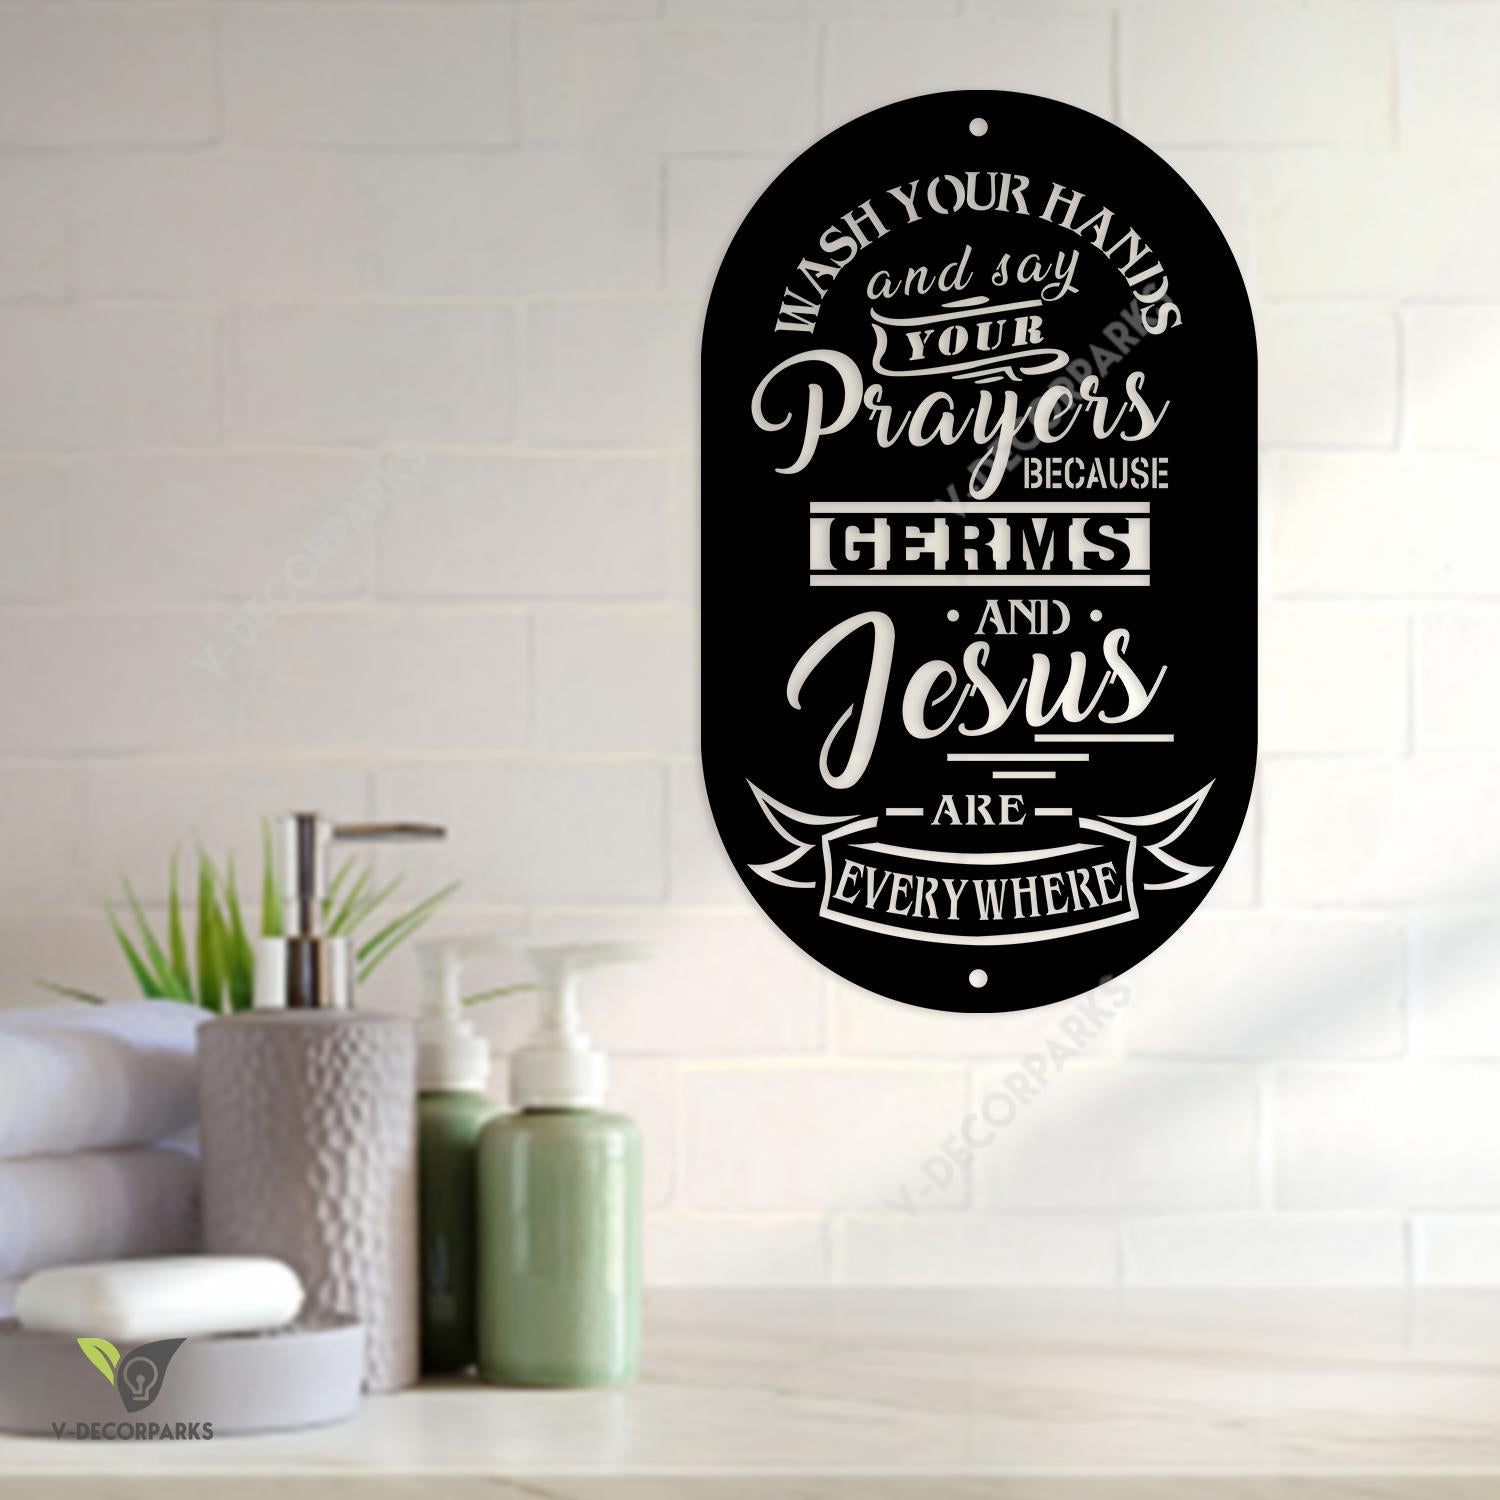 Wash Your Hands And Say Your Prayer Funny Bathroom Metal Sign, Jesus Christ Metallic Decoration